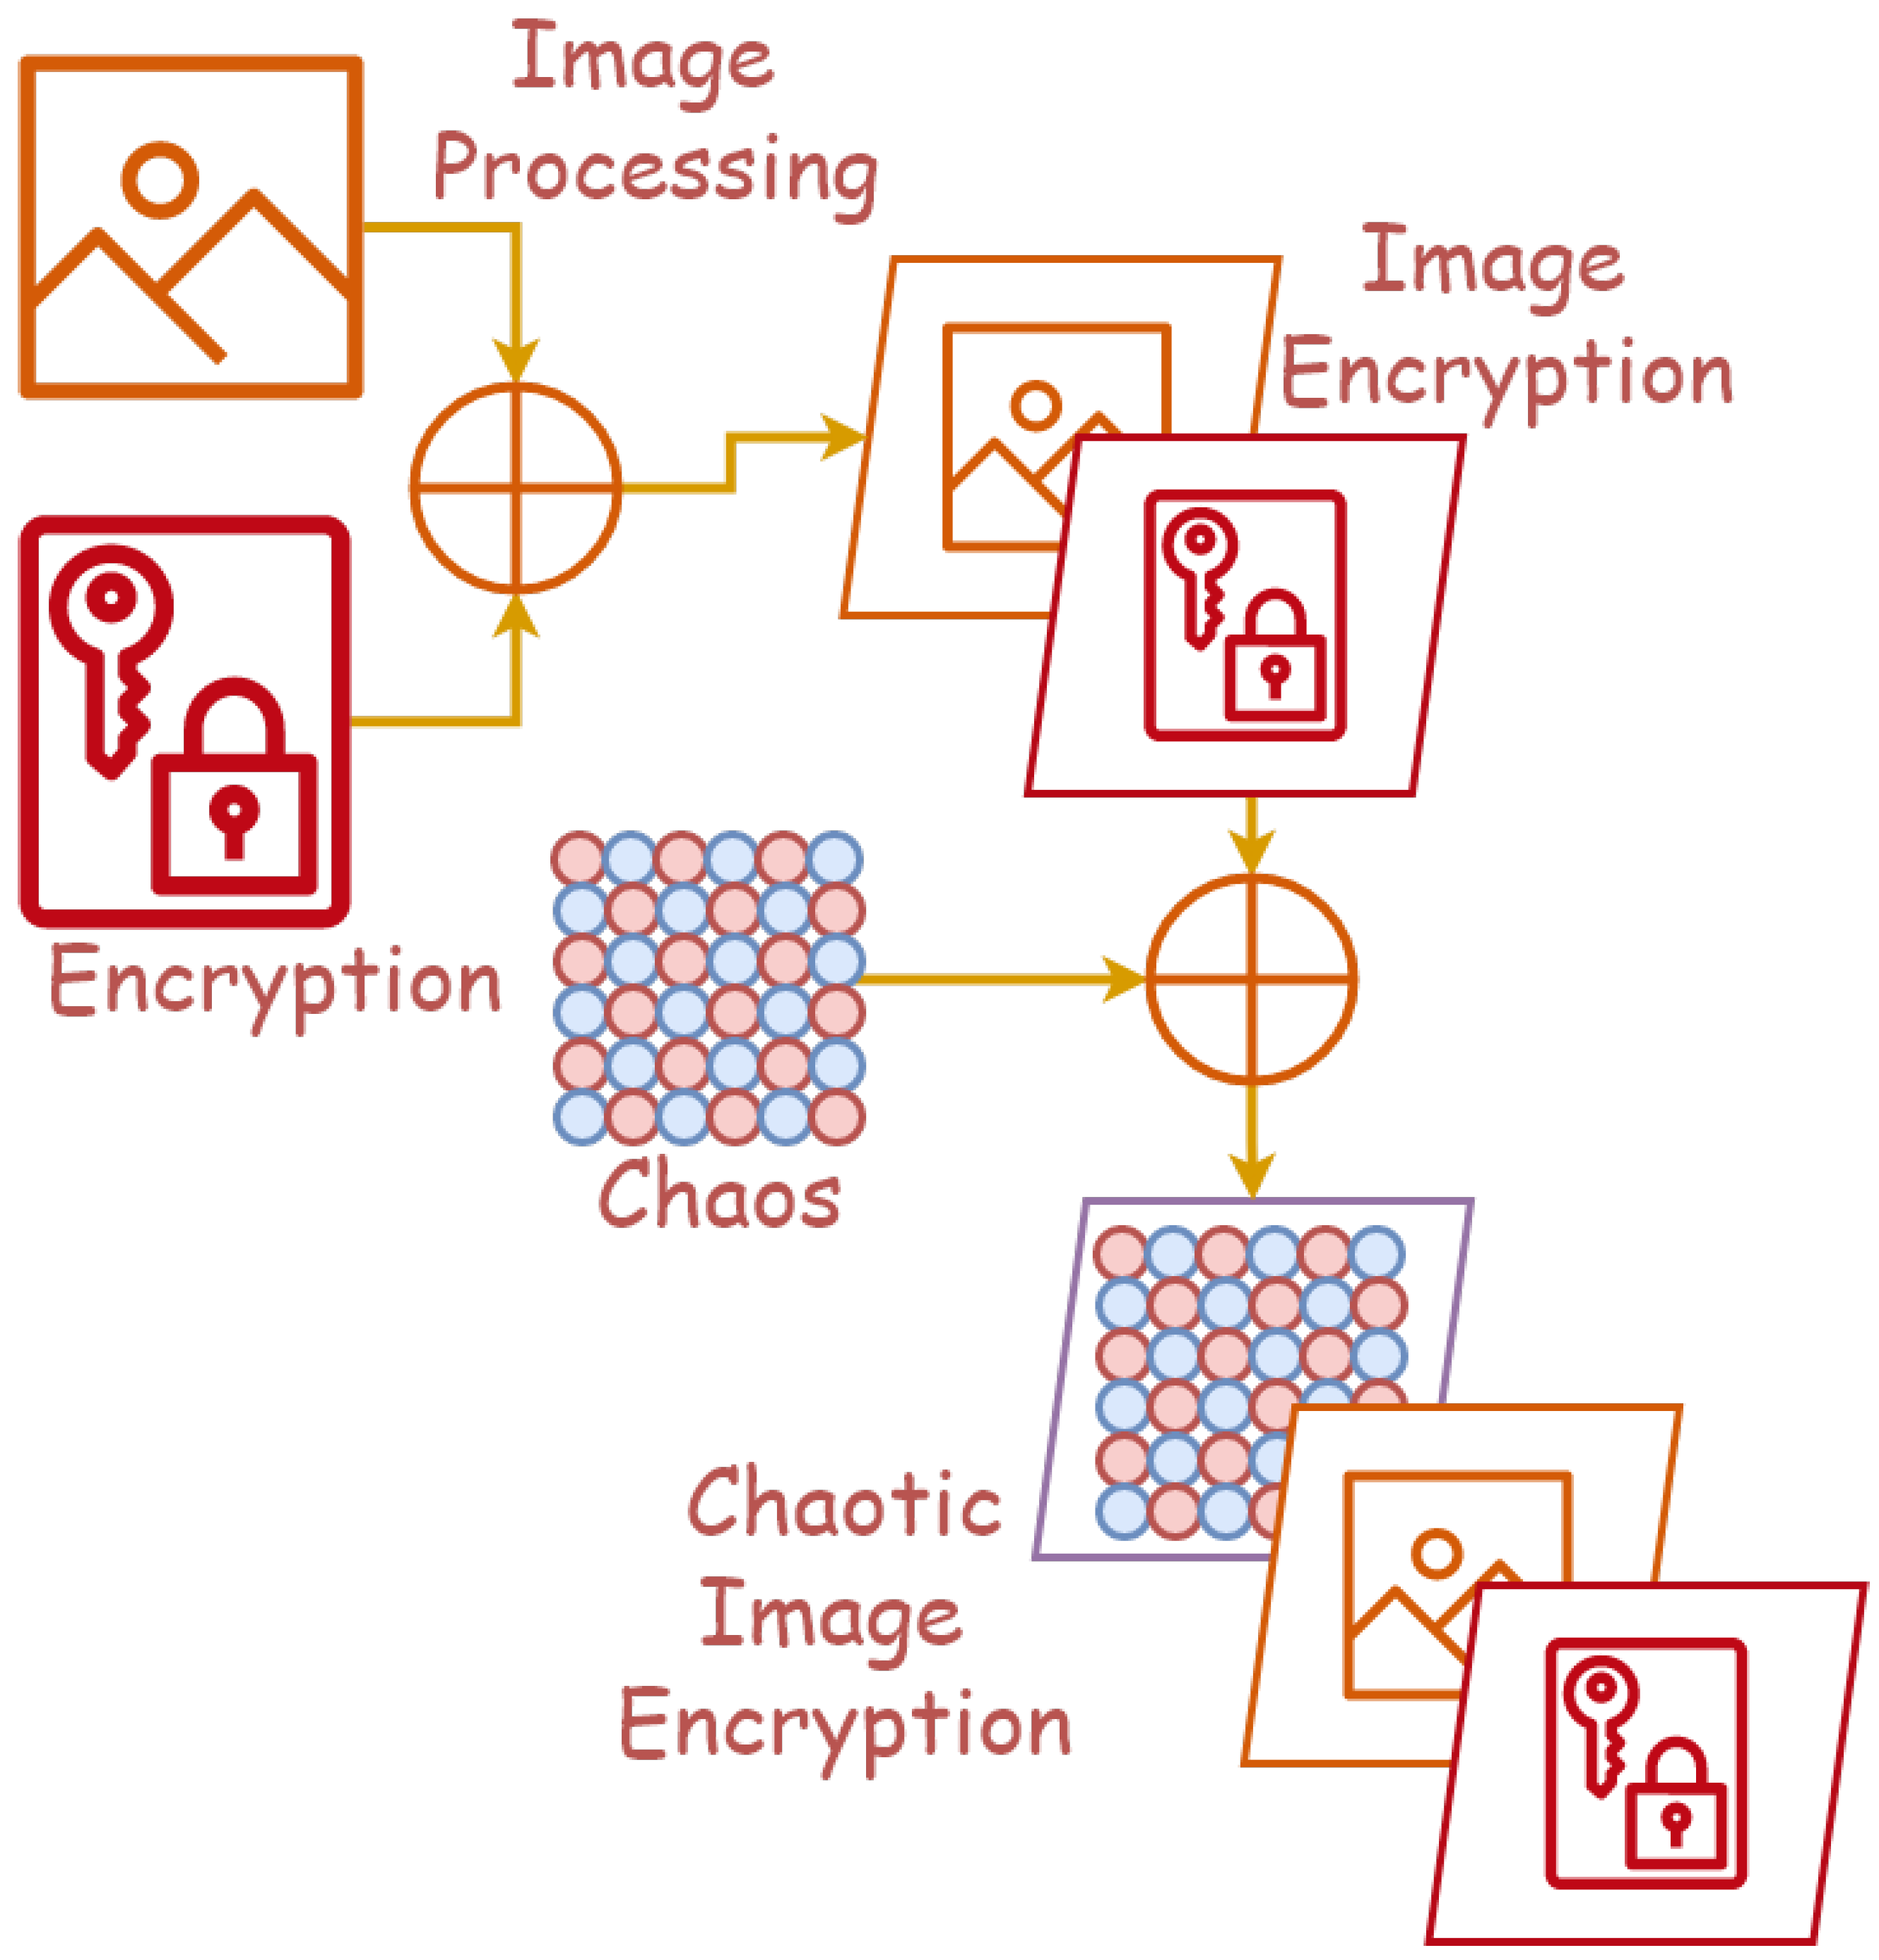 ASI | Free Full-Text | Chaotic Image Encryption: State-of-the-Art,  Ecosystem, and Future Roadmap